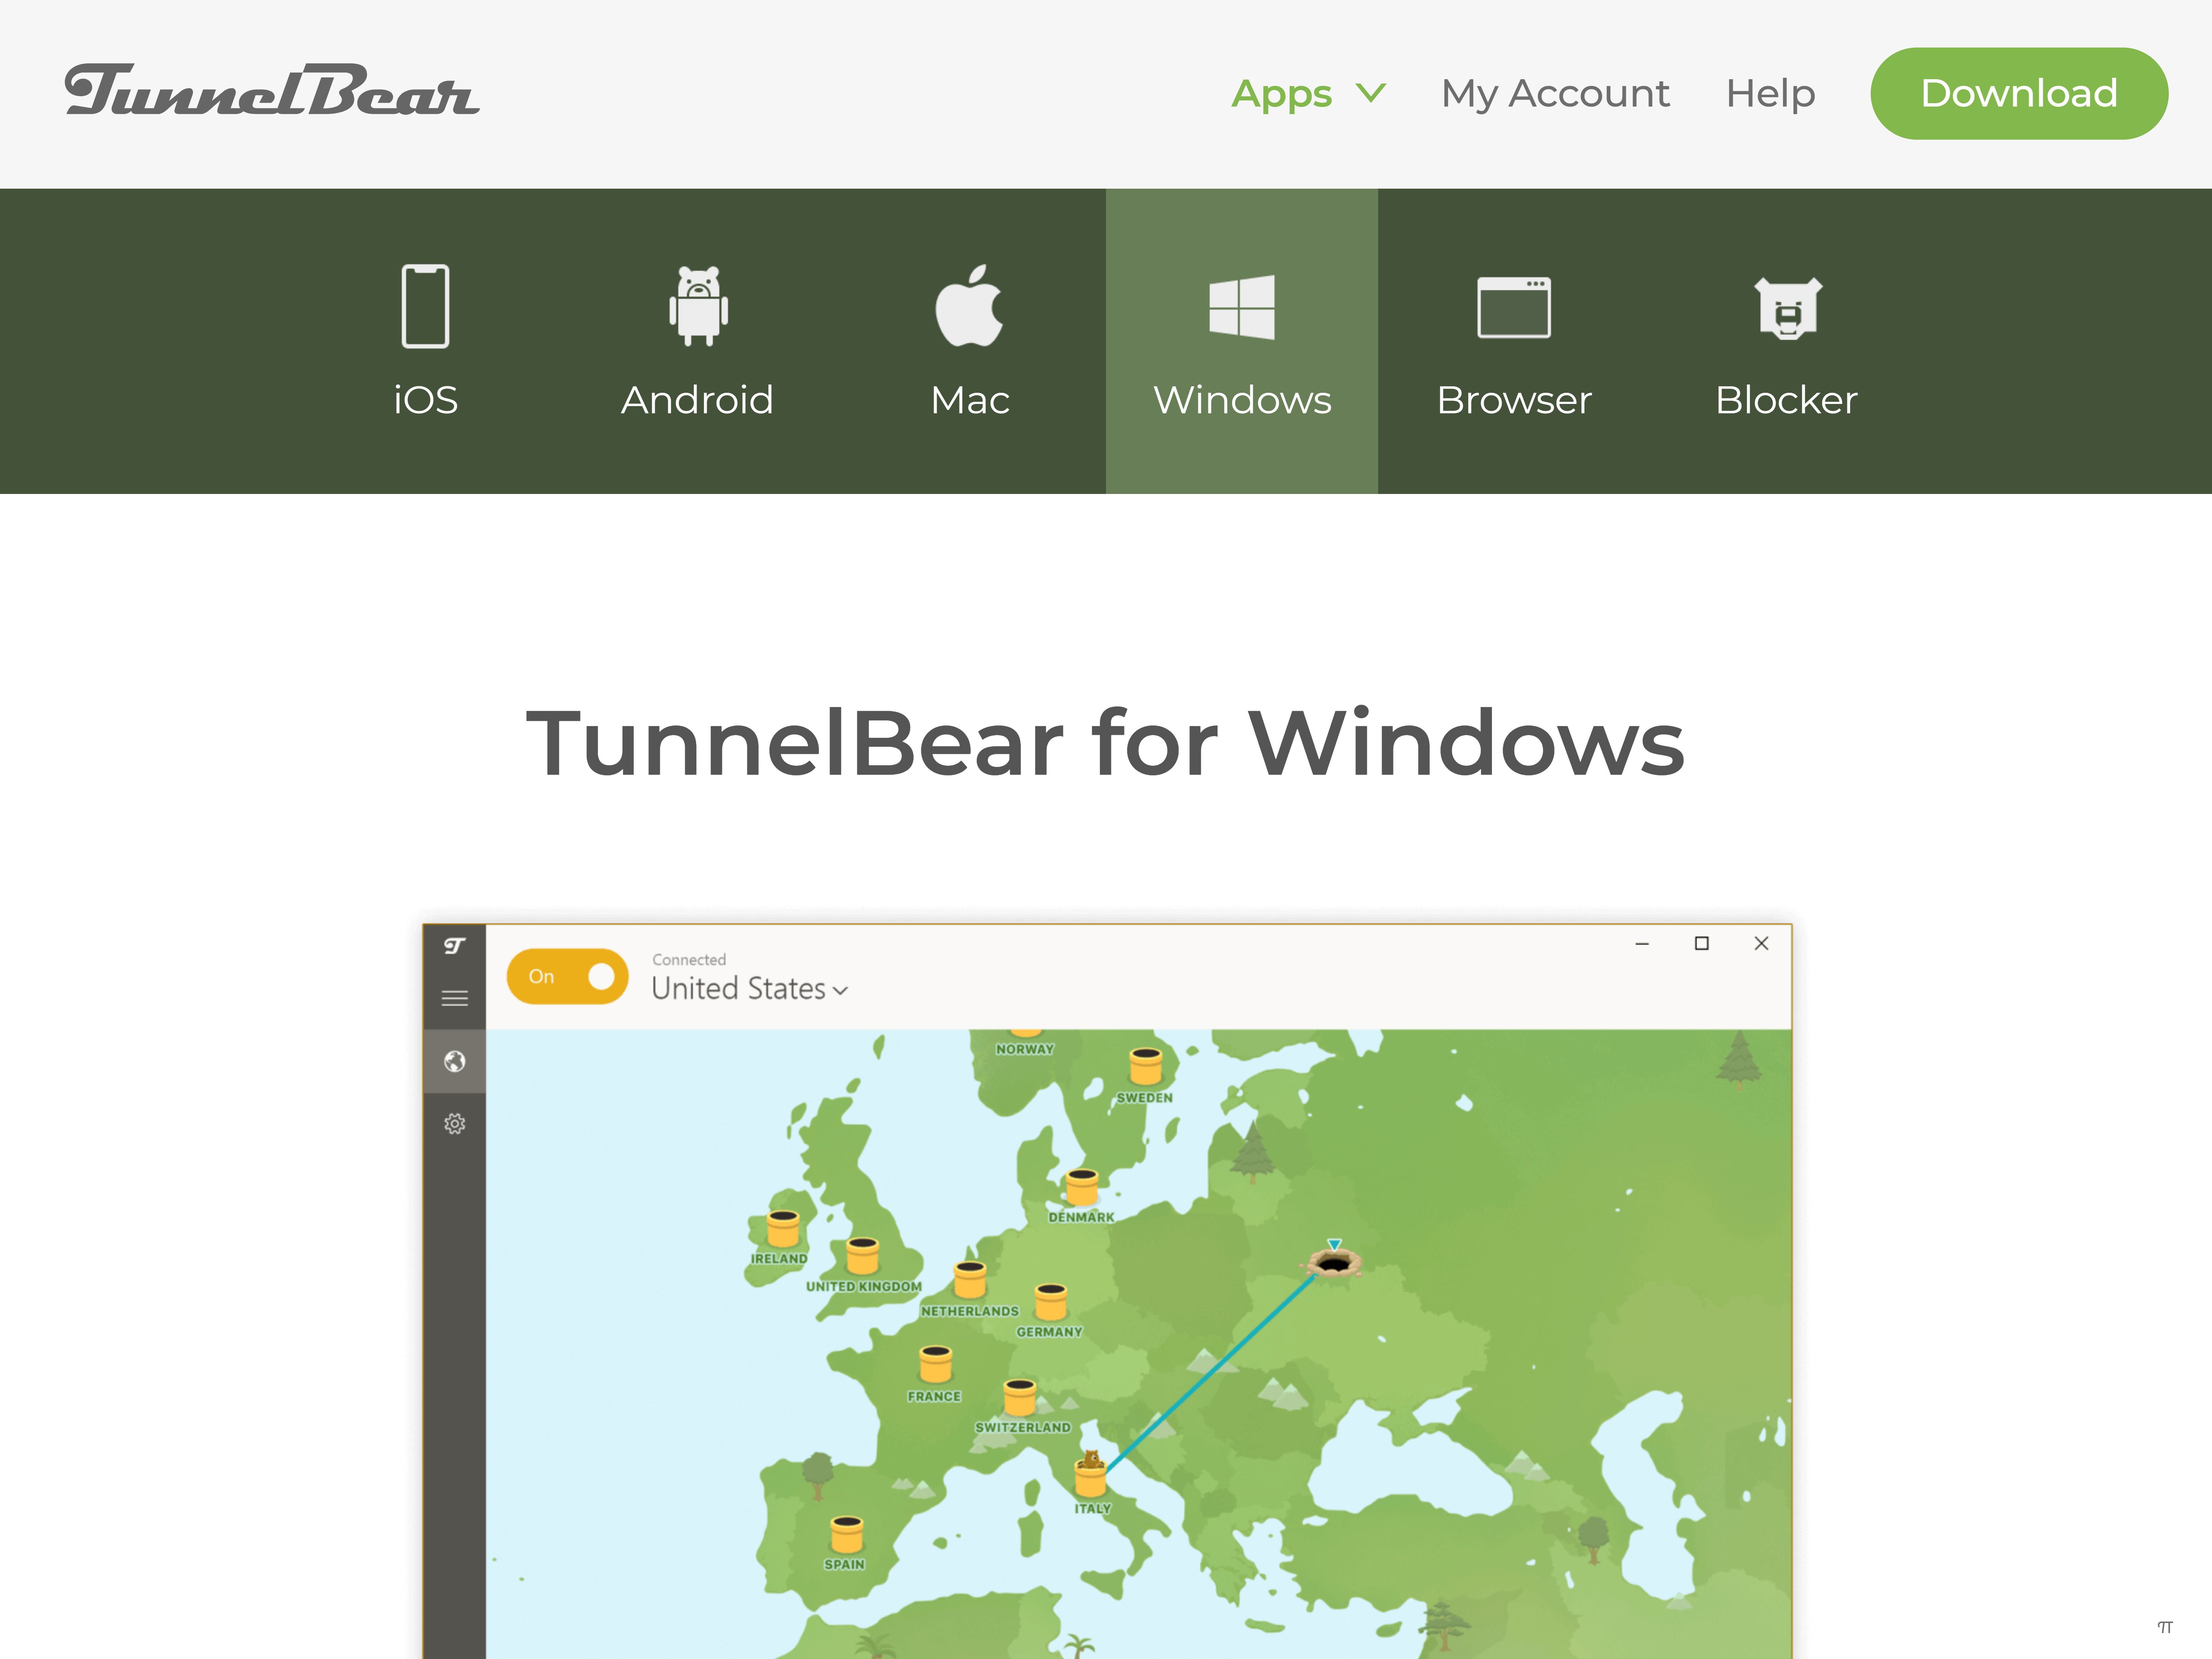 what does tunnelbear do